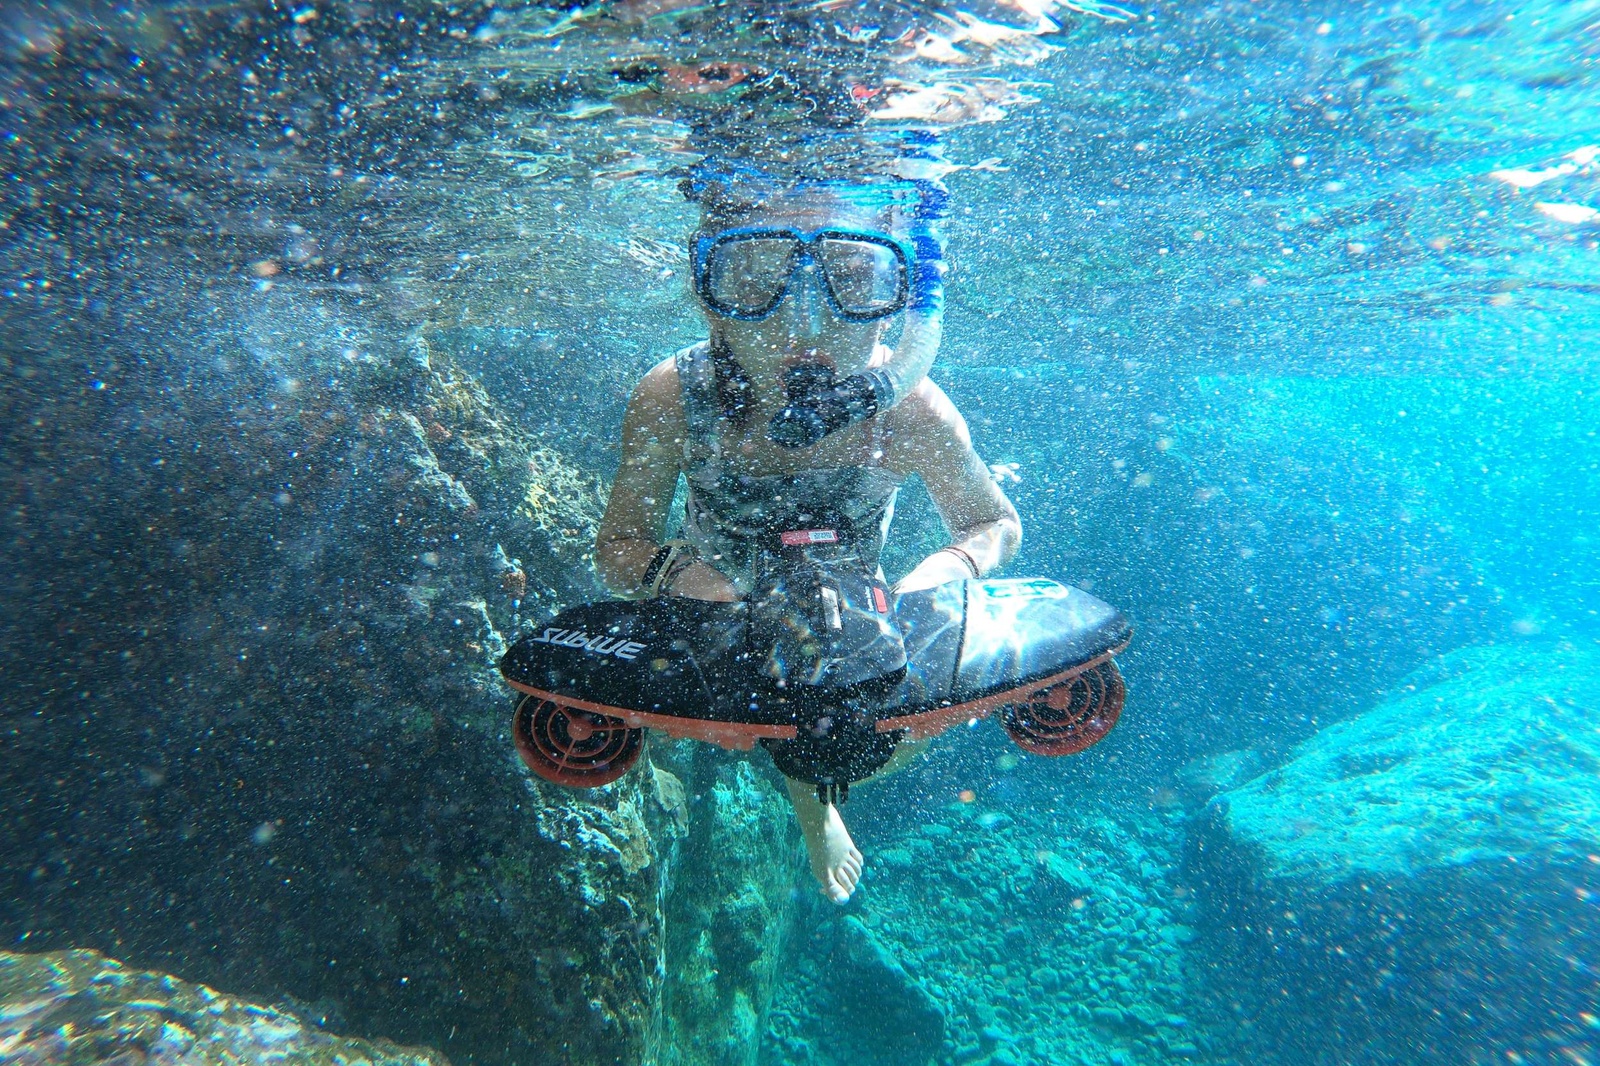 Guest using E water scooter 